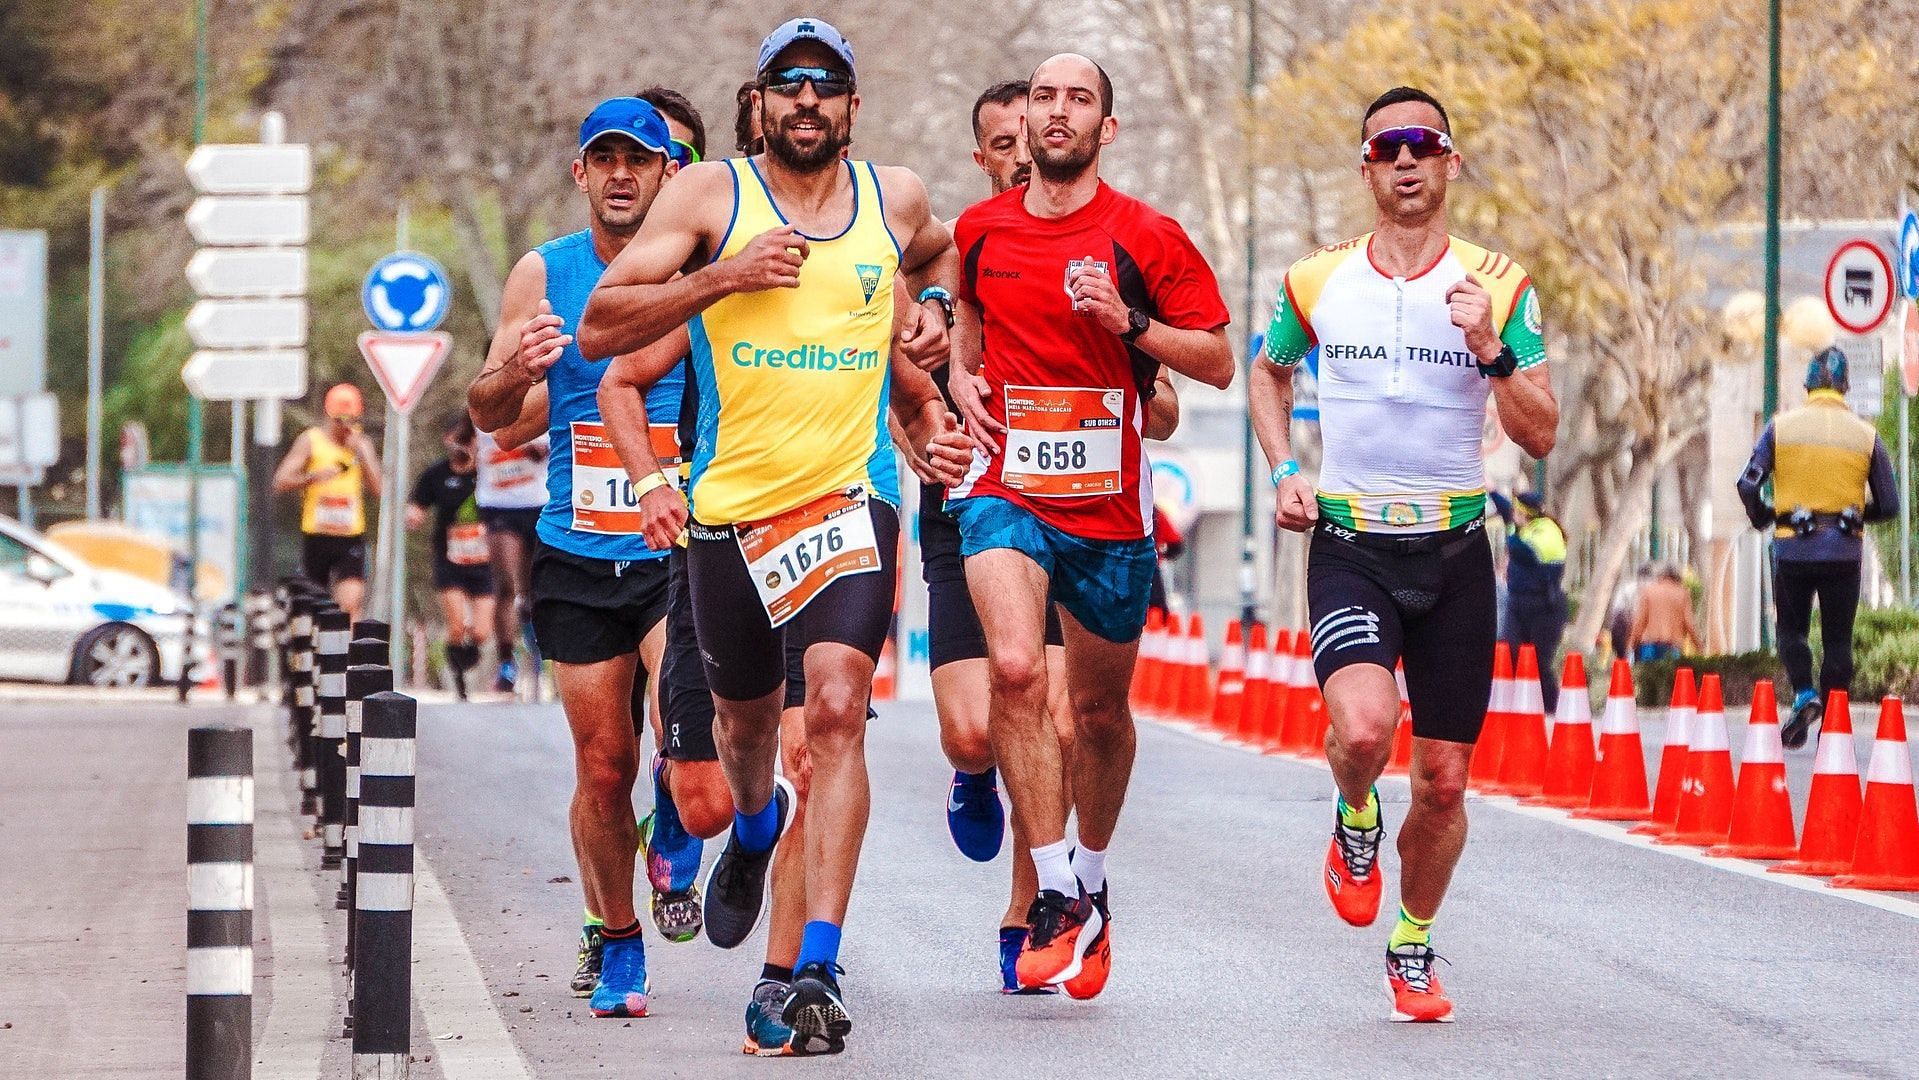 Cardio workouts are great to train your body for a marathon. (Photo by RUN 4 FFWPU via pexels)